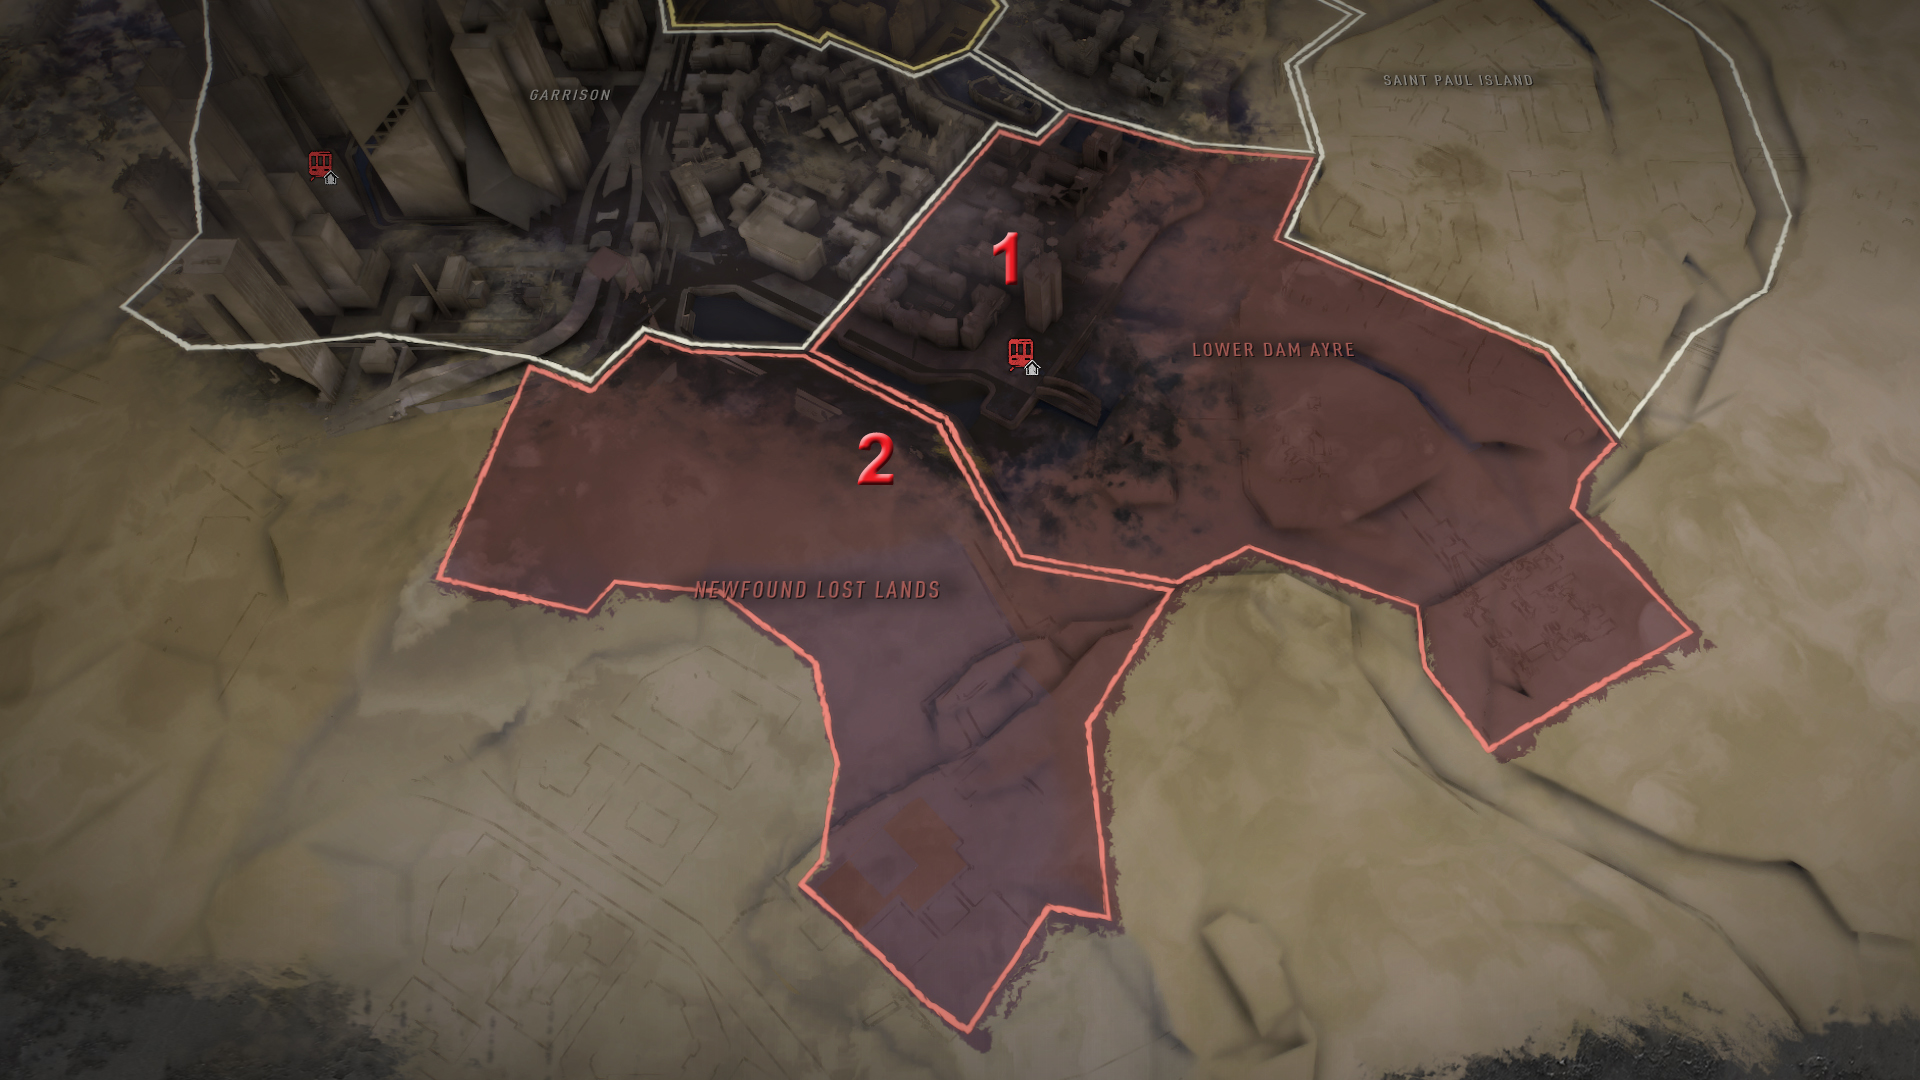 Dying Light 2 Inhibitor Location - Central South